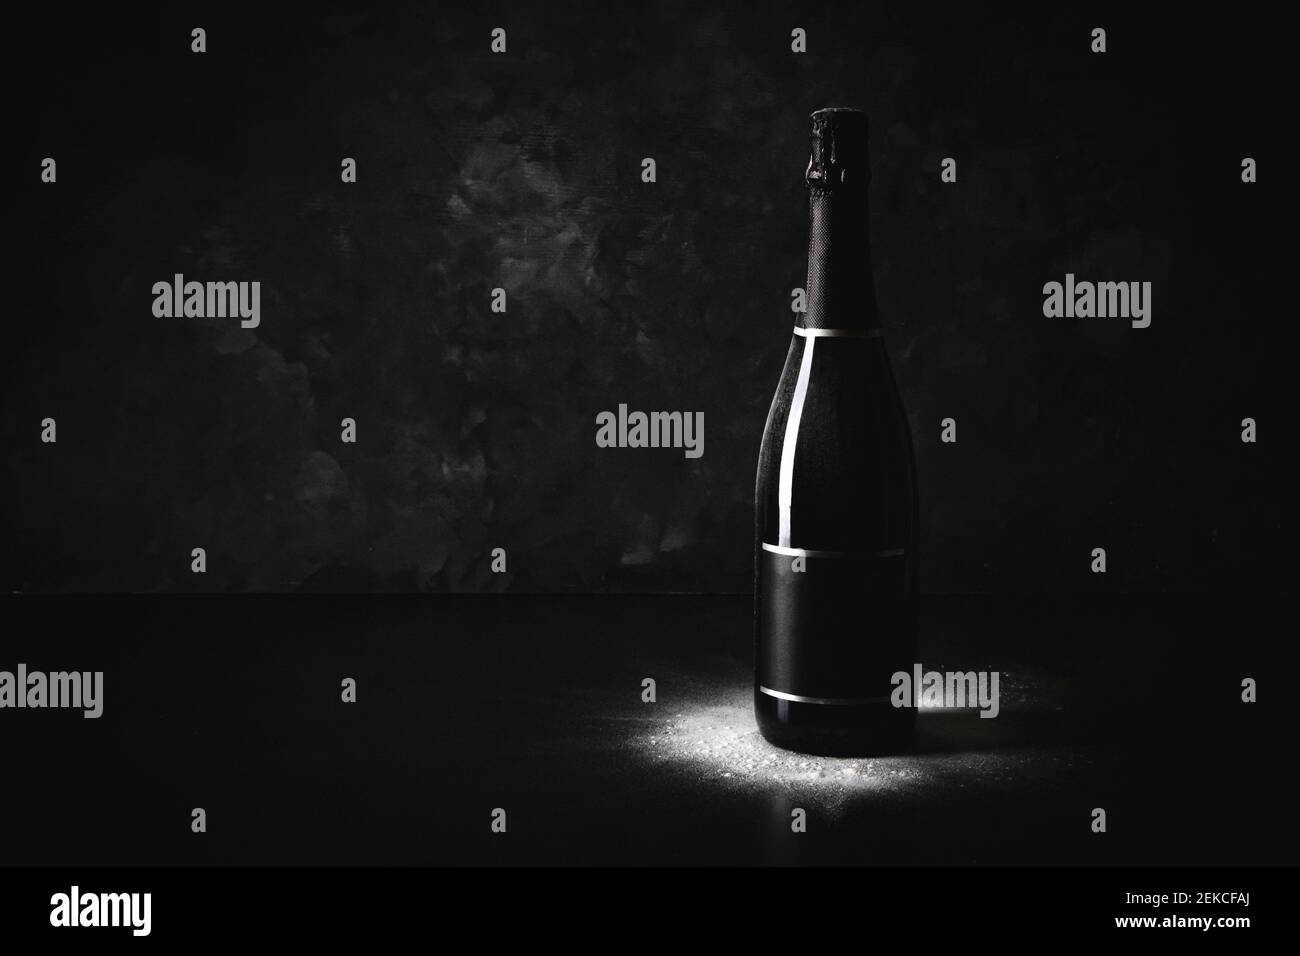 Studio shot of black bottle of champagne with blank label Stock Photo